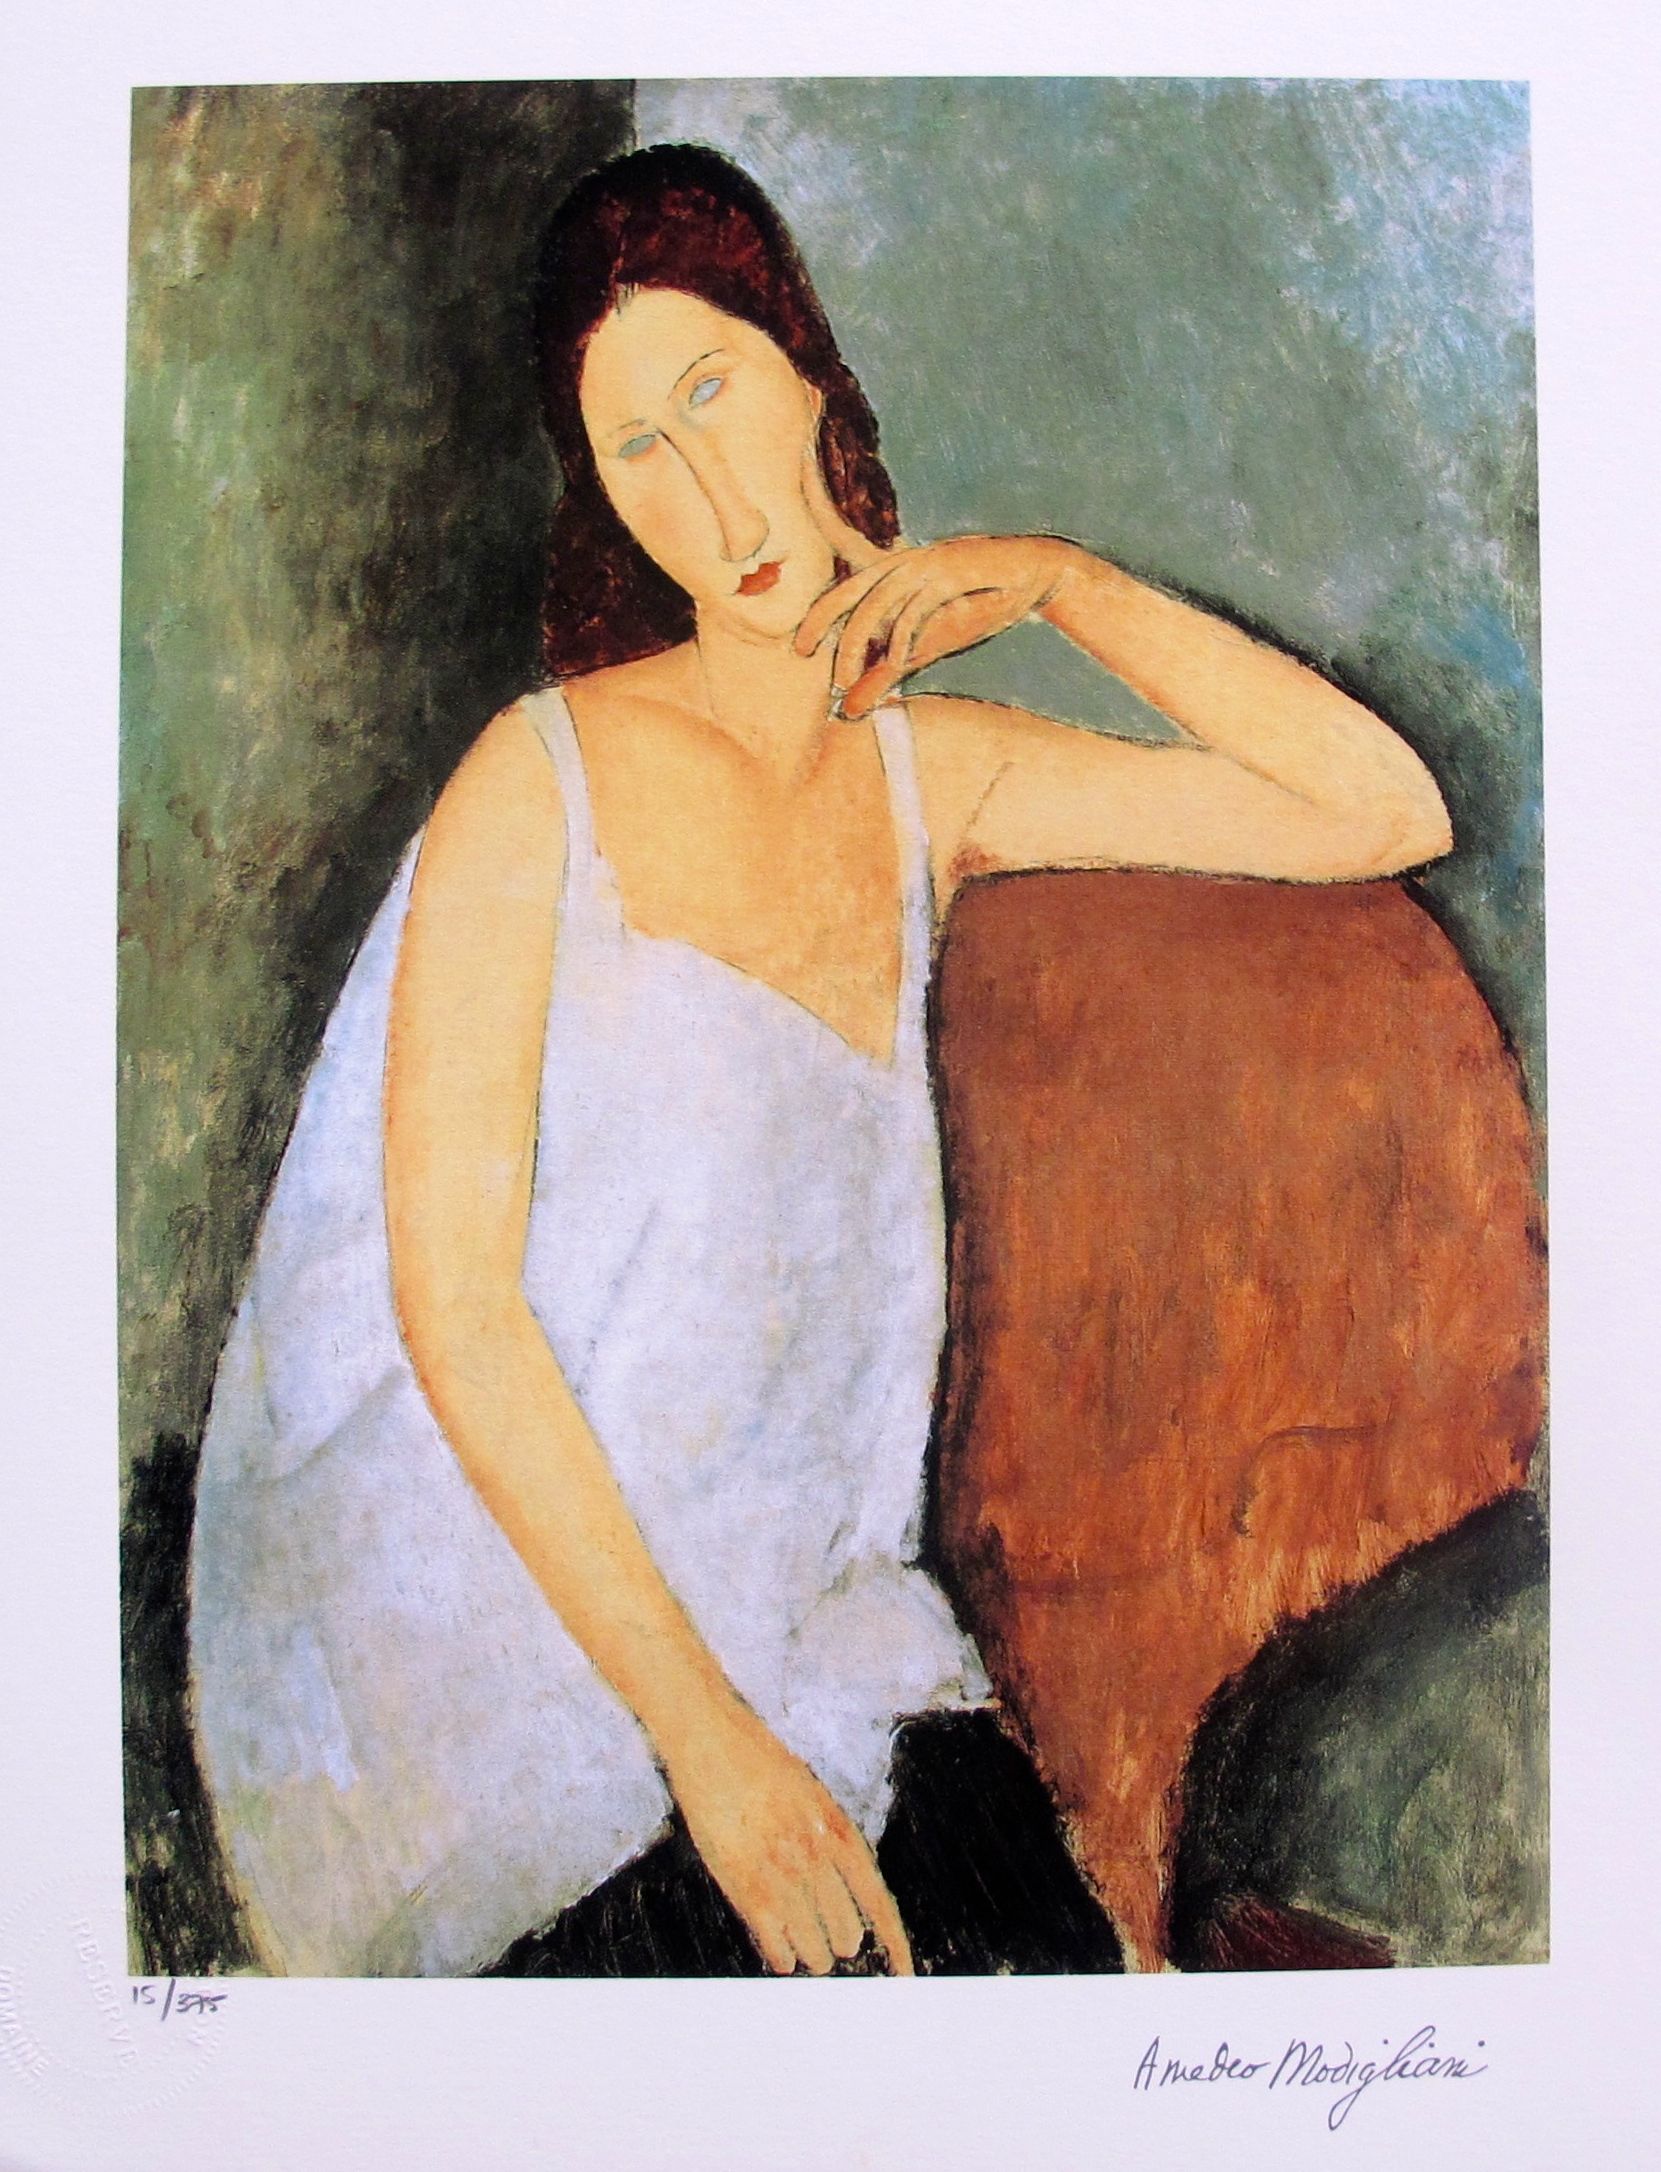 Amedeo Modigliani "PORTRAIT OF JEANNE HEBUTERNE" Estate Signed Limited Edition Small Giclee